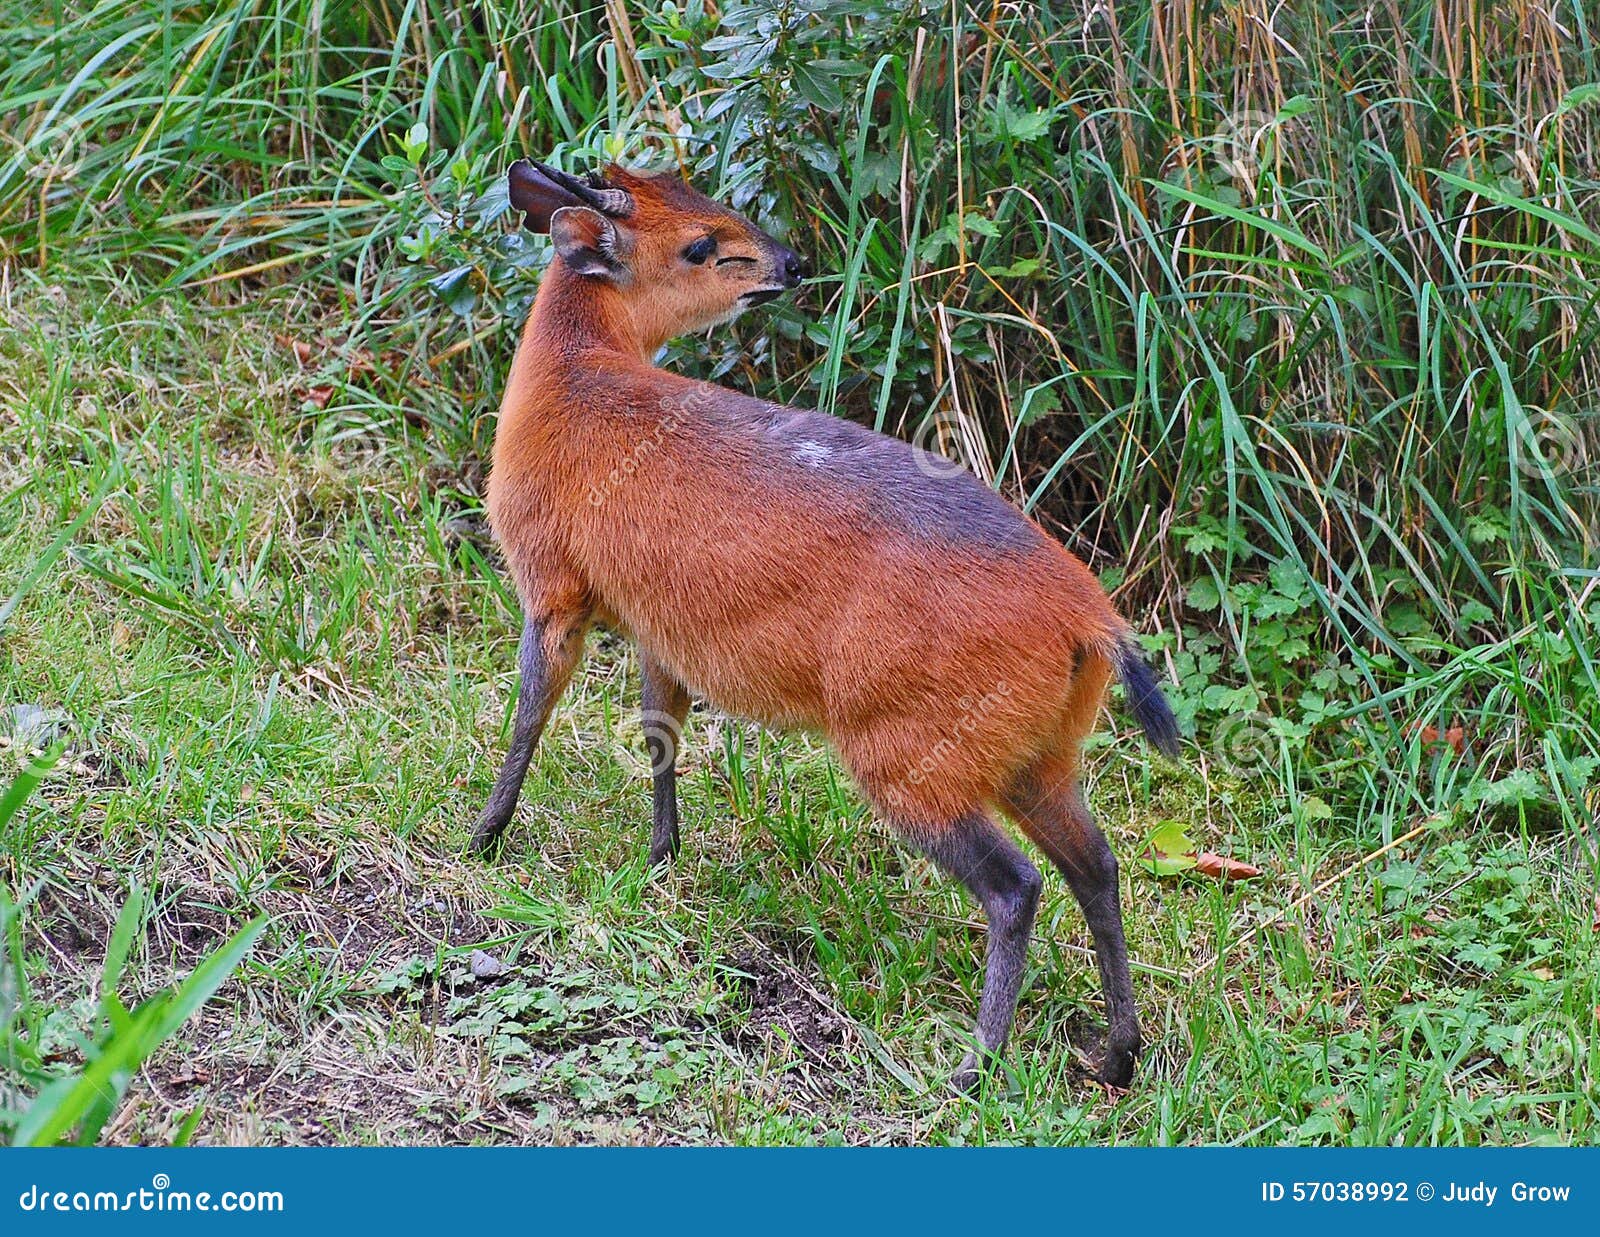 red-flanked duiker, a tiny antelope